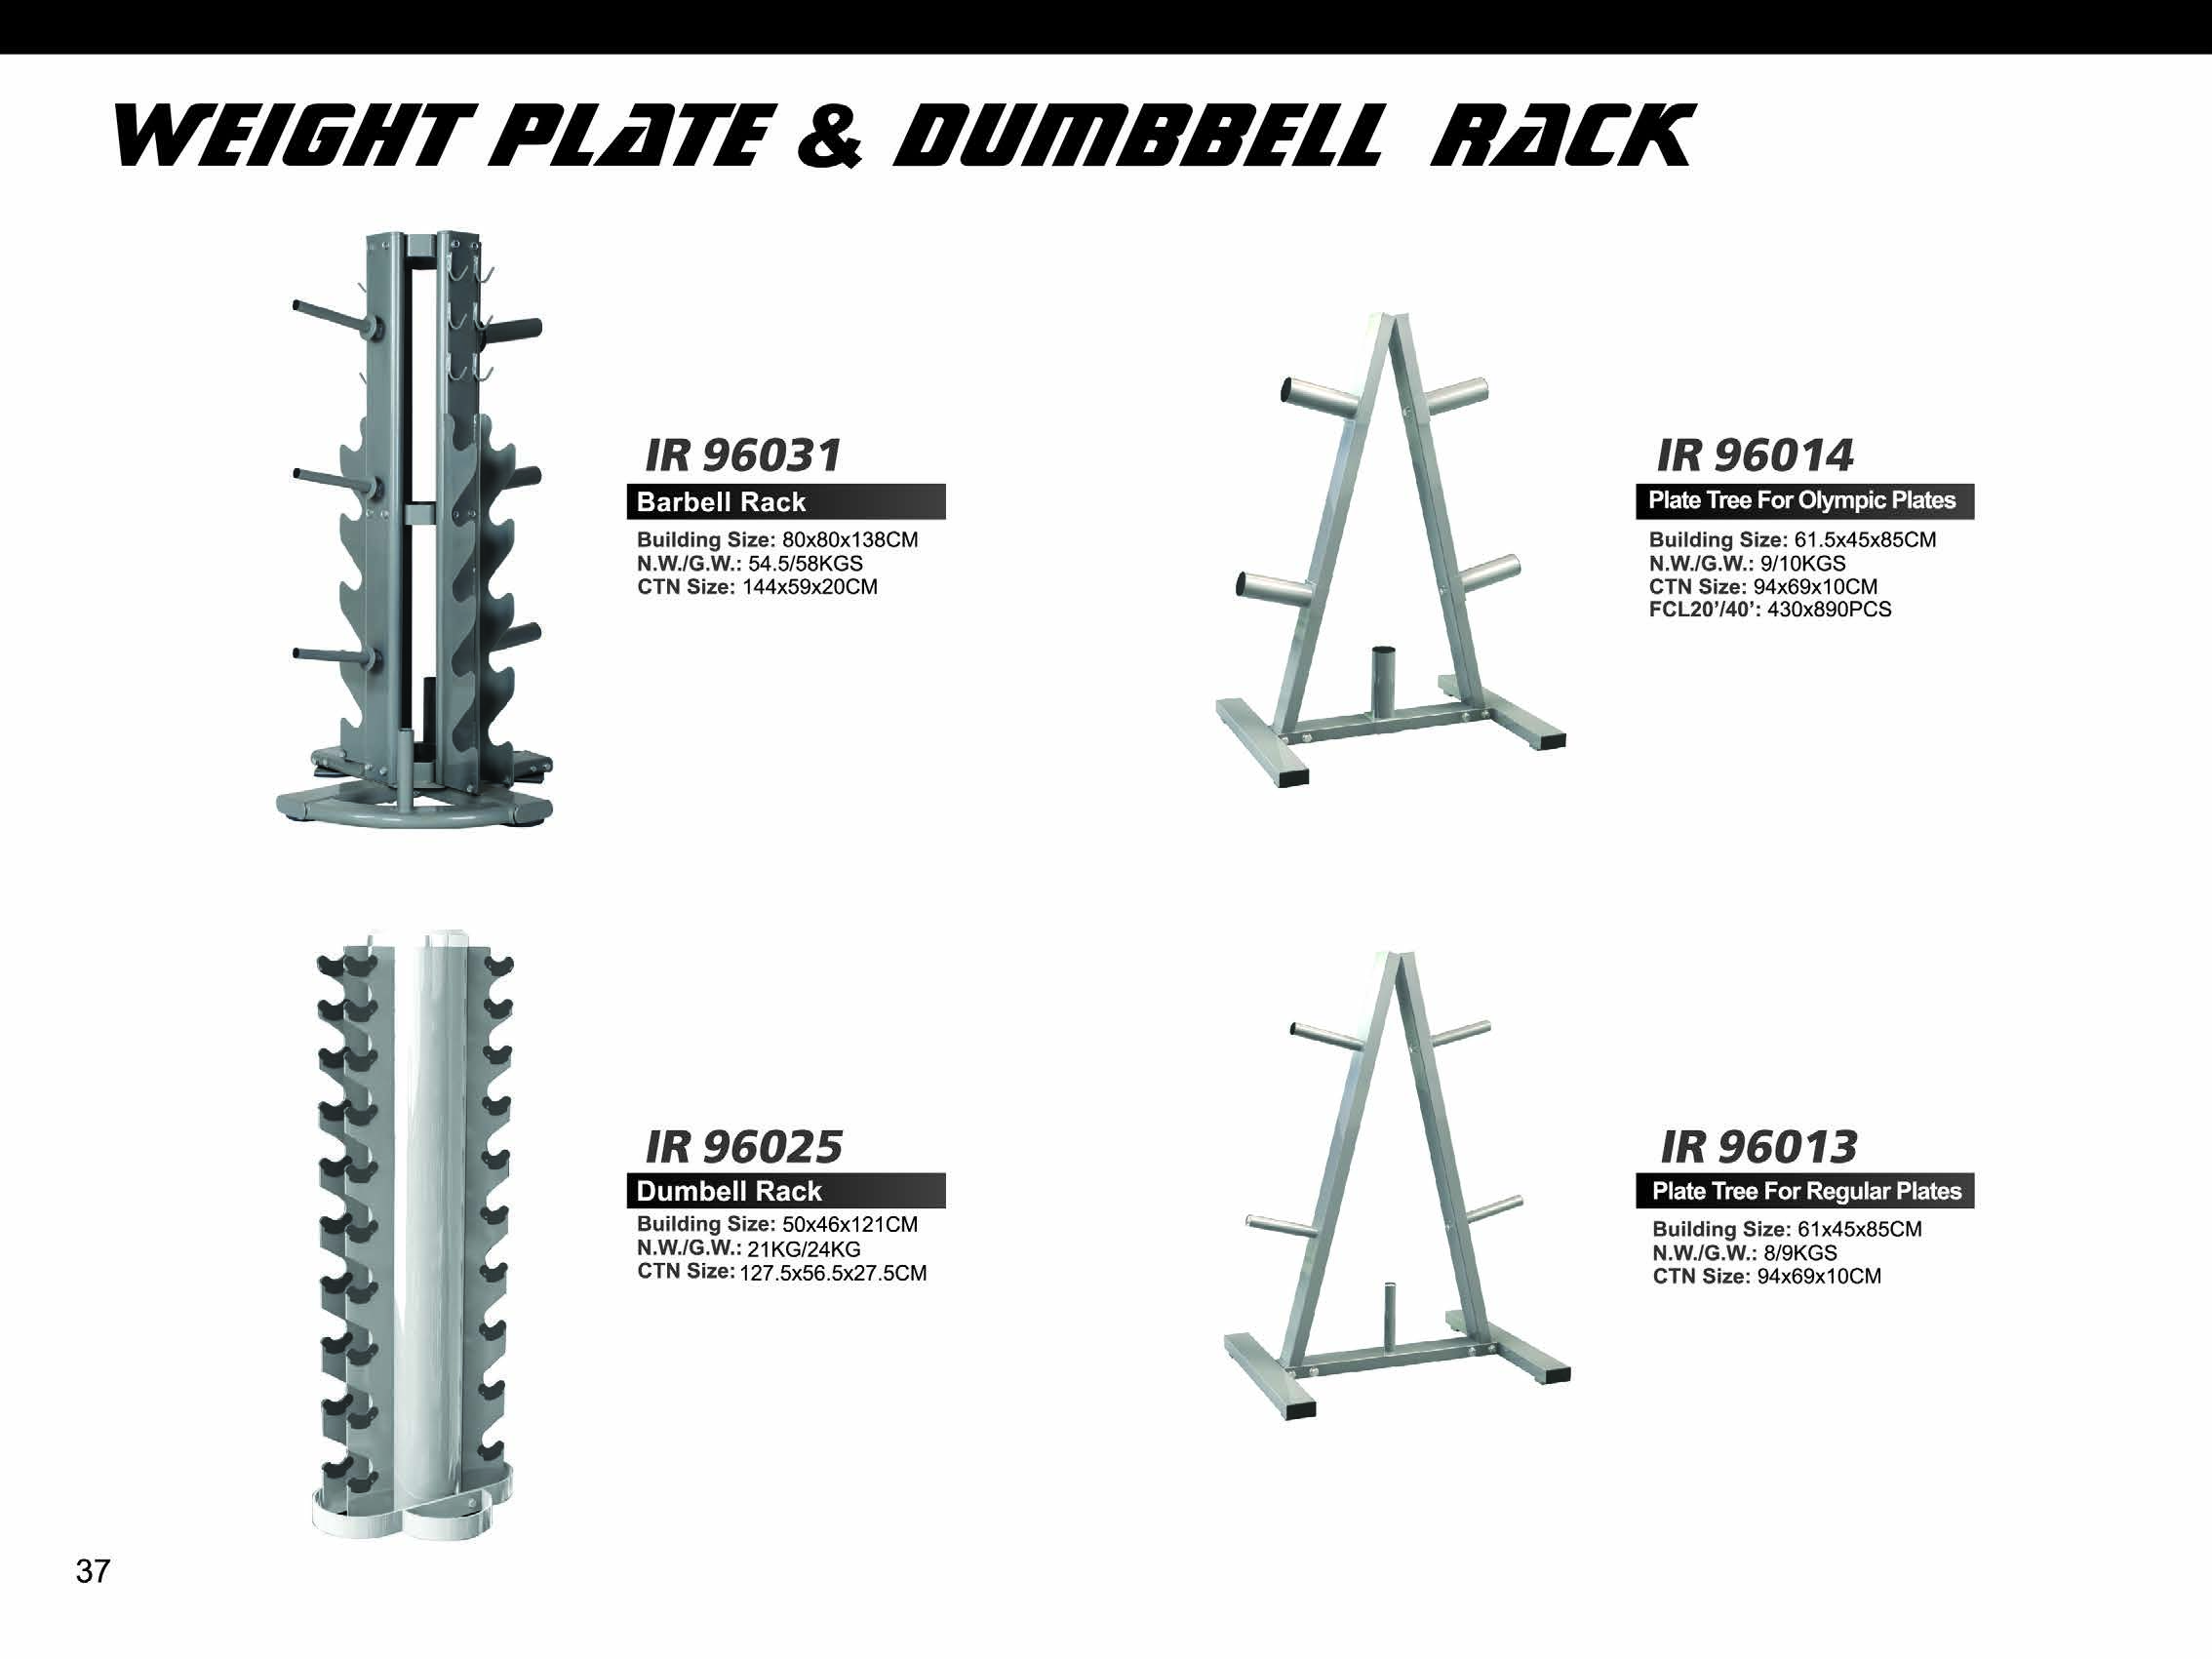 WEIGHT PLATE & DUMBBELL RACK